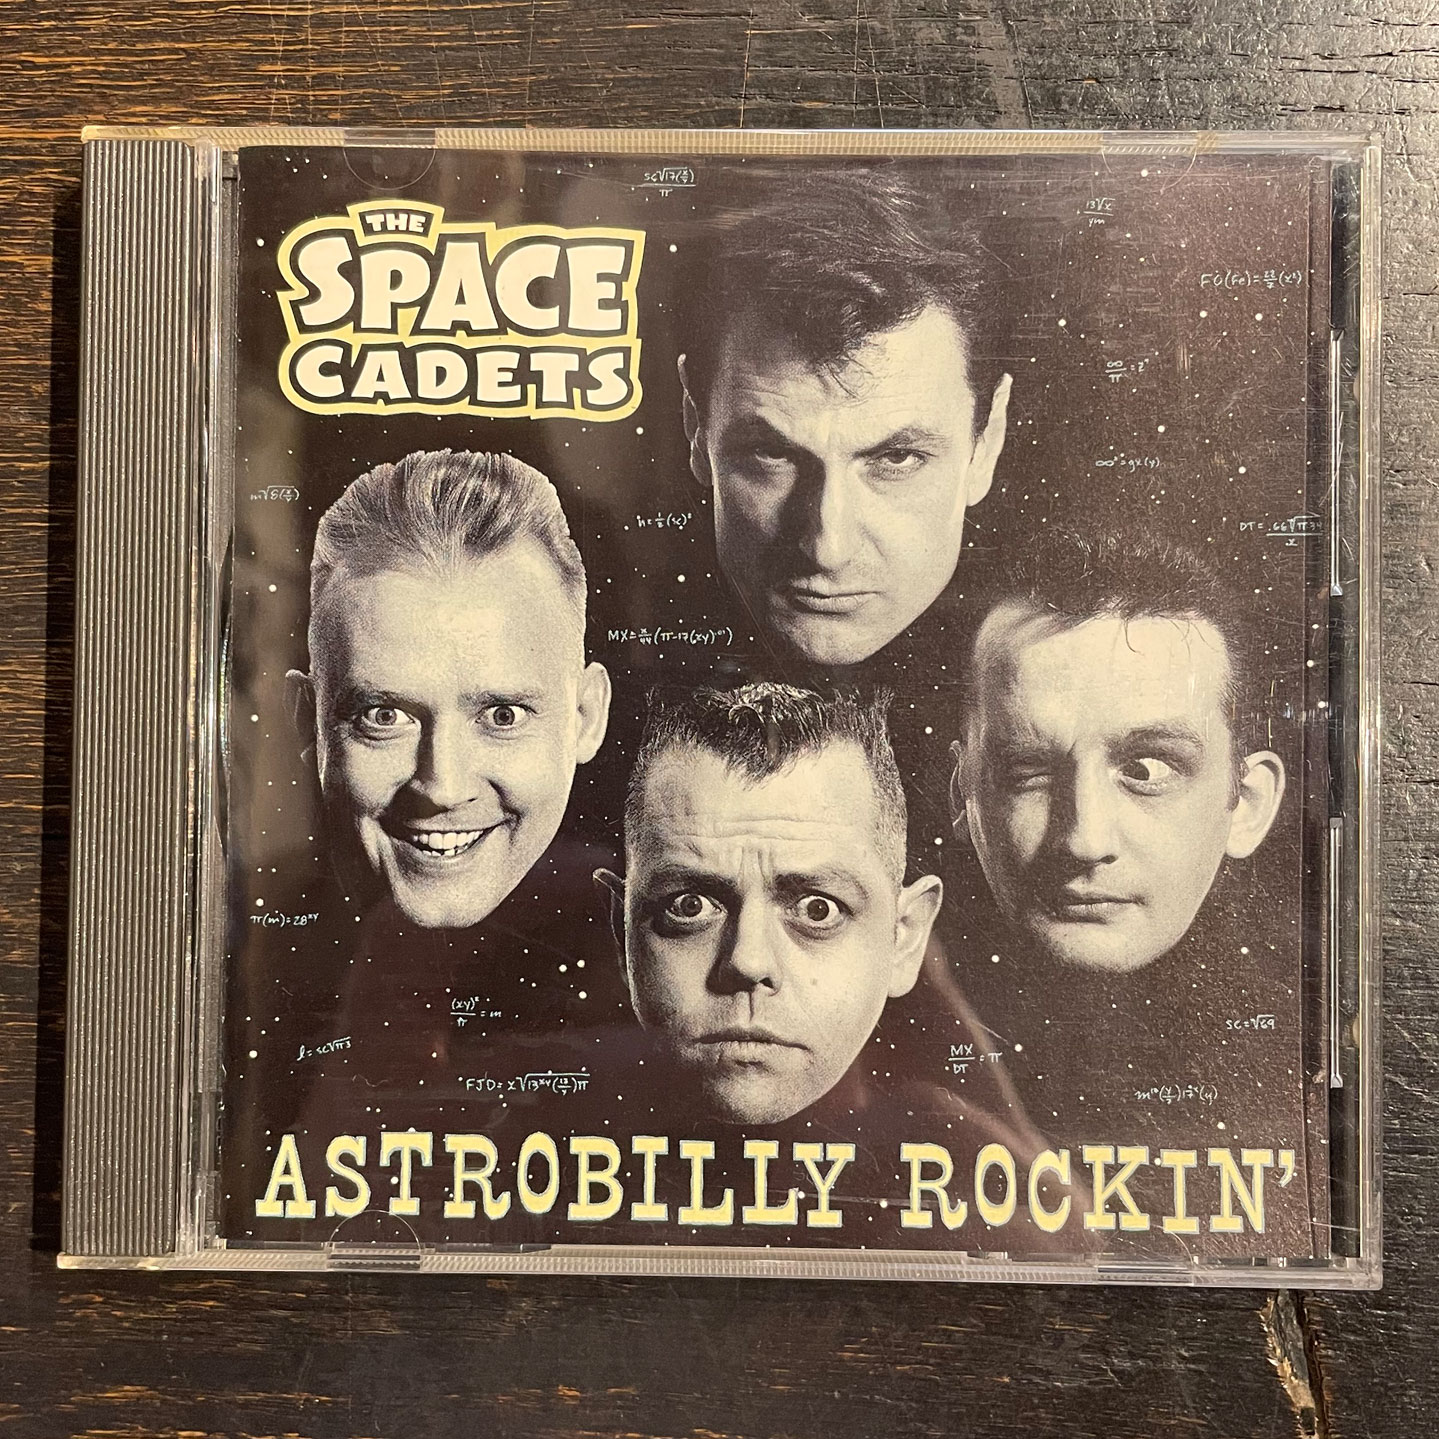 USED! THE SPACE CADETS CD Astrobilly Rockin'